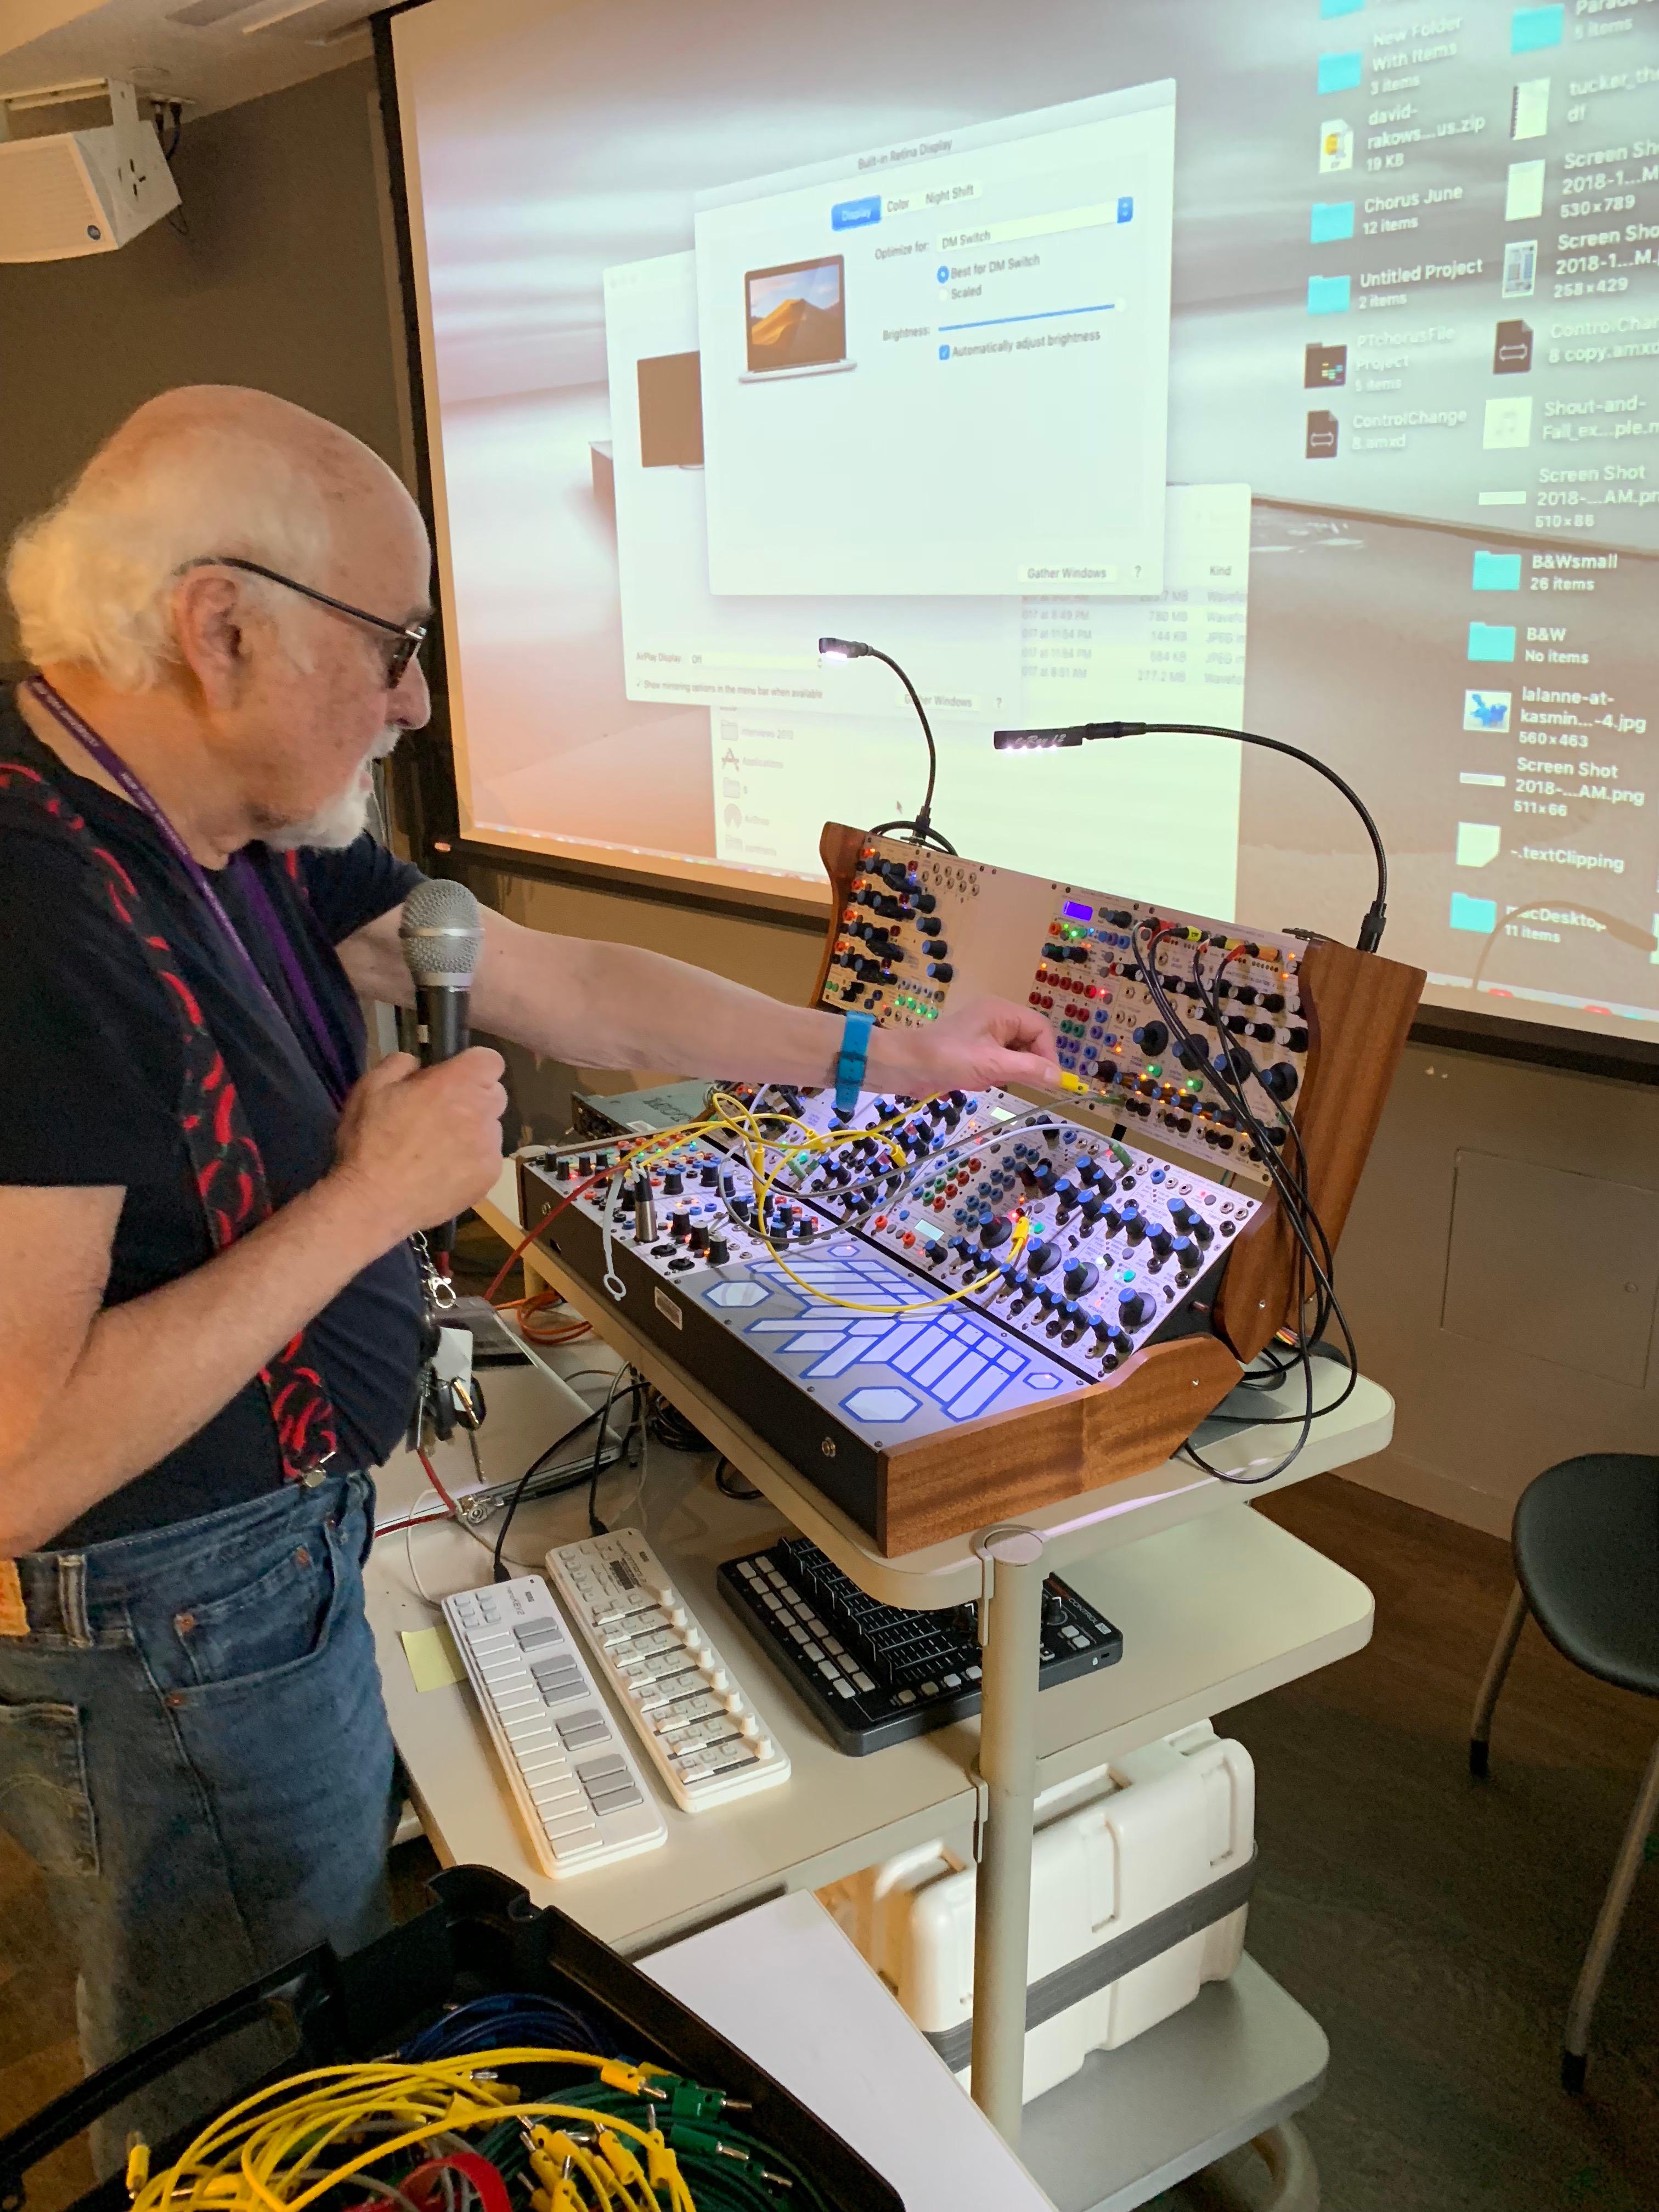 Morton Subotnick demonstrating how he uses an envelope follower of his voice to generate envelopes for other sounds.  I used a similar technique by having the motion of liquids generate an envelope.